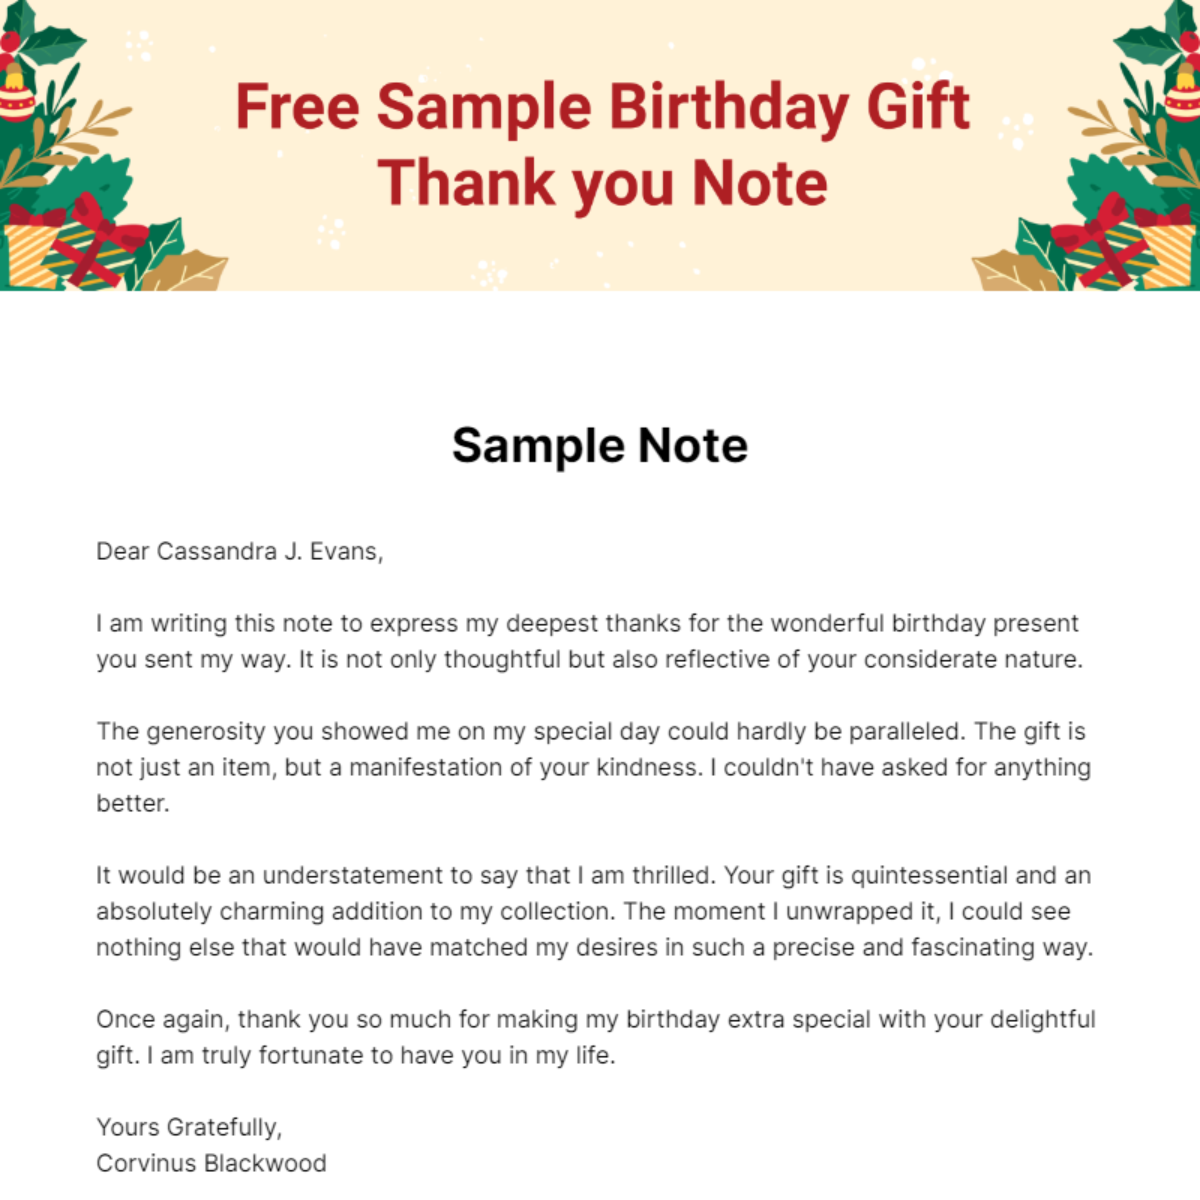 Sample Birthday Gift Thank you Note Template